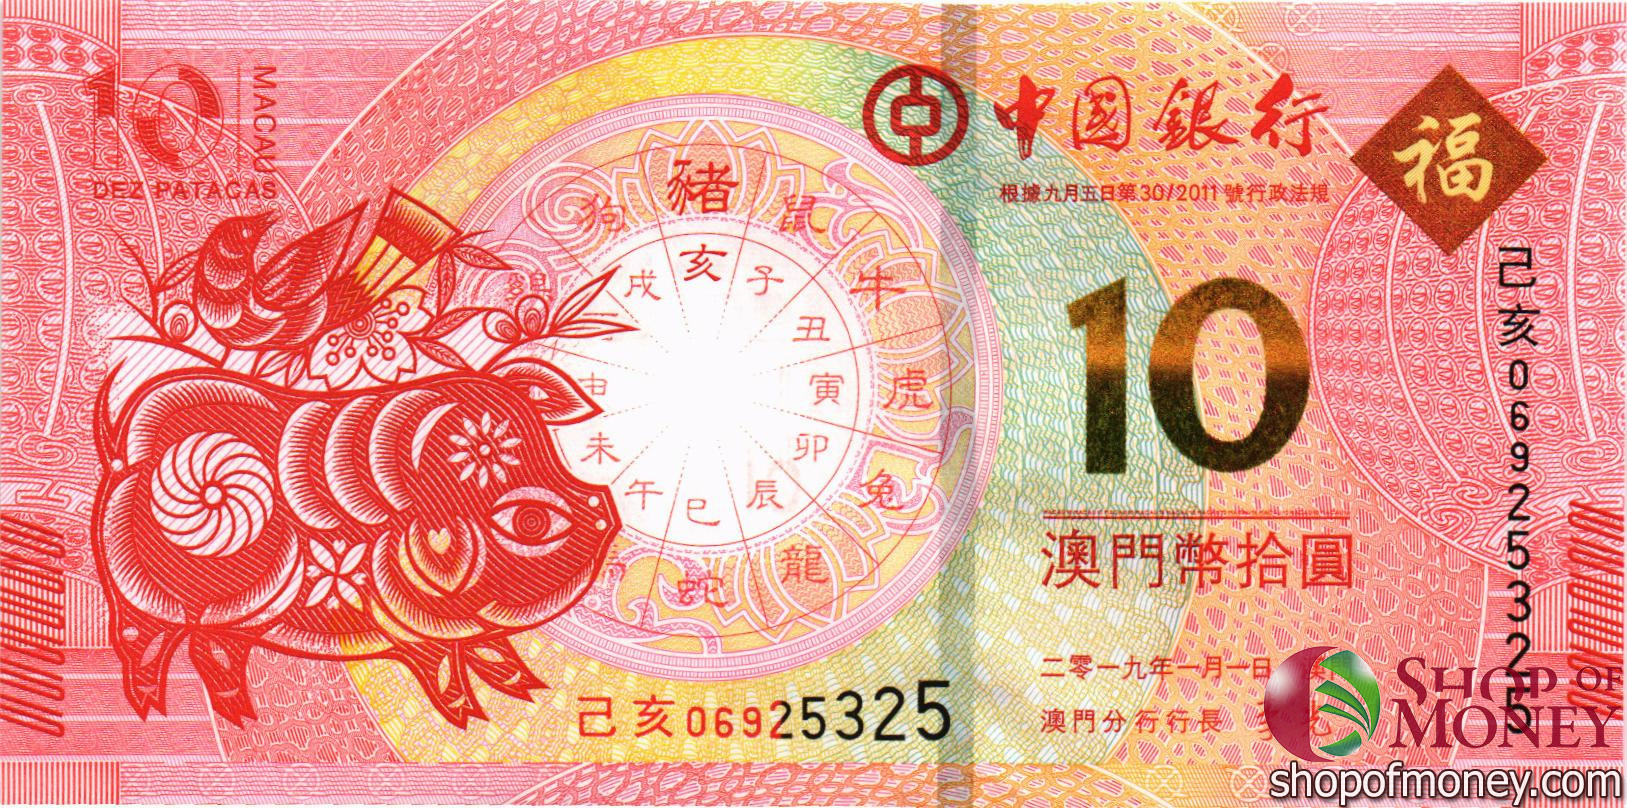 МАКАО 10 ПАТАК (BANK OF CHINA)